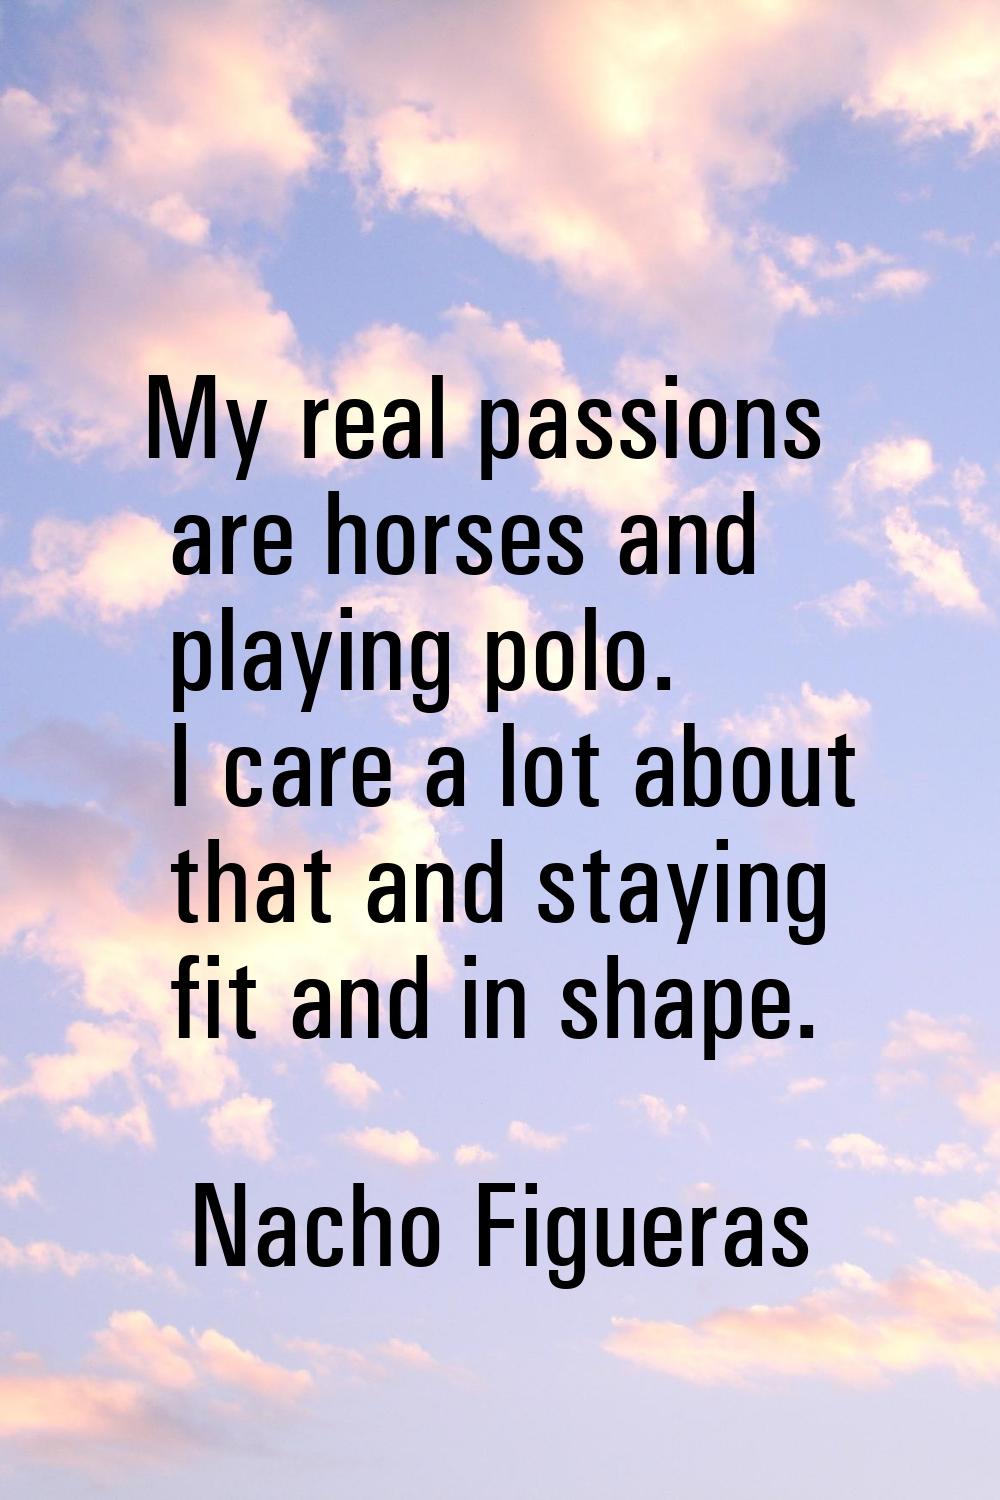 My real passions are horses and playing polo. I care a lot about that and staying fit and in shape.